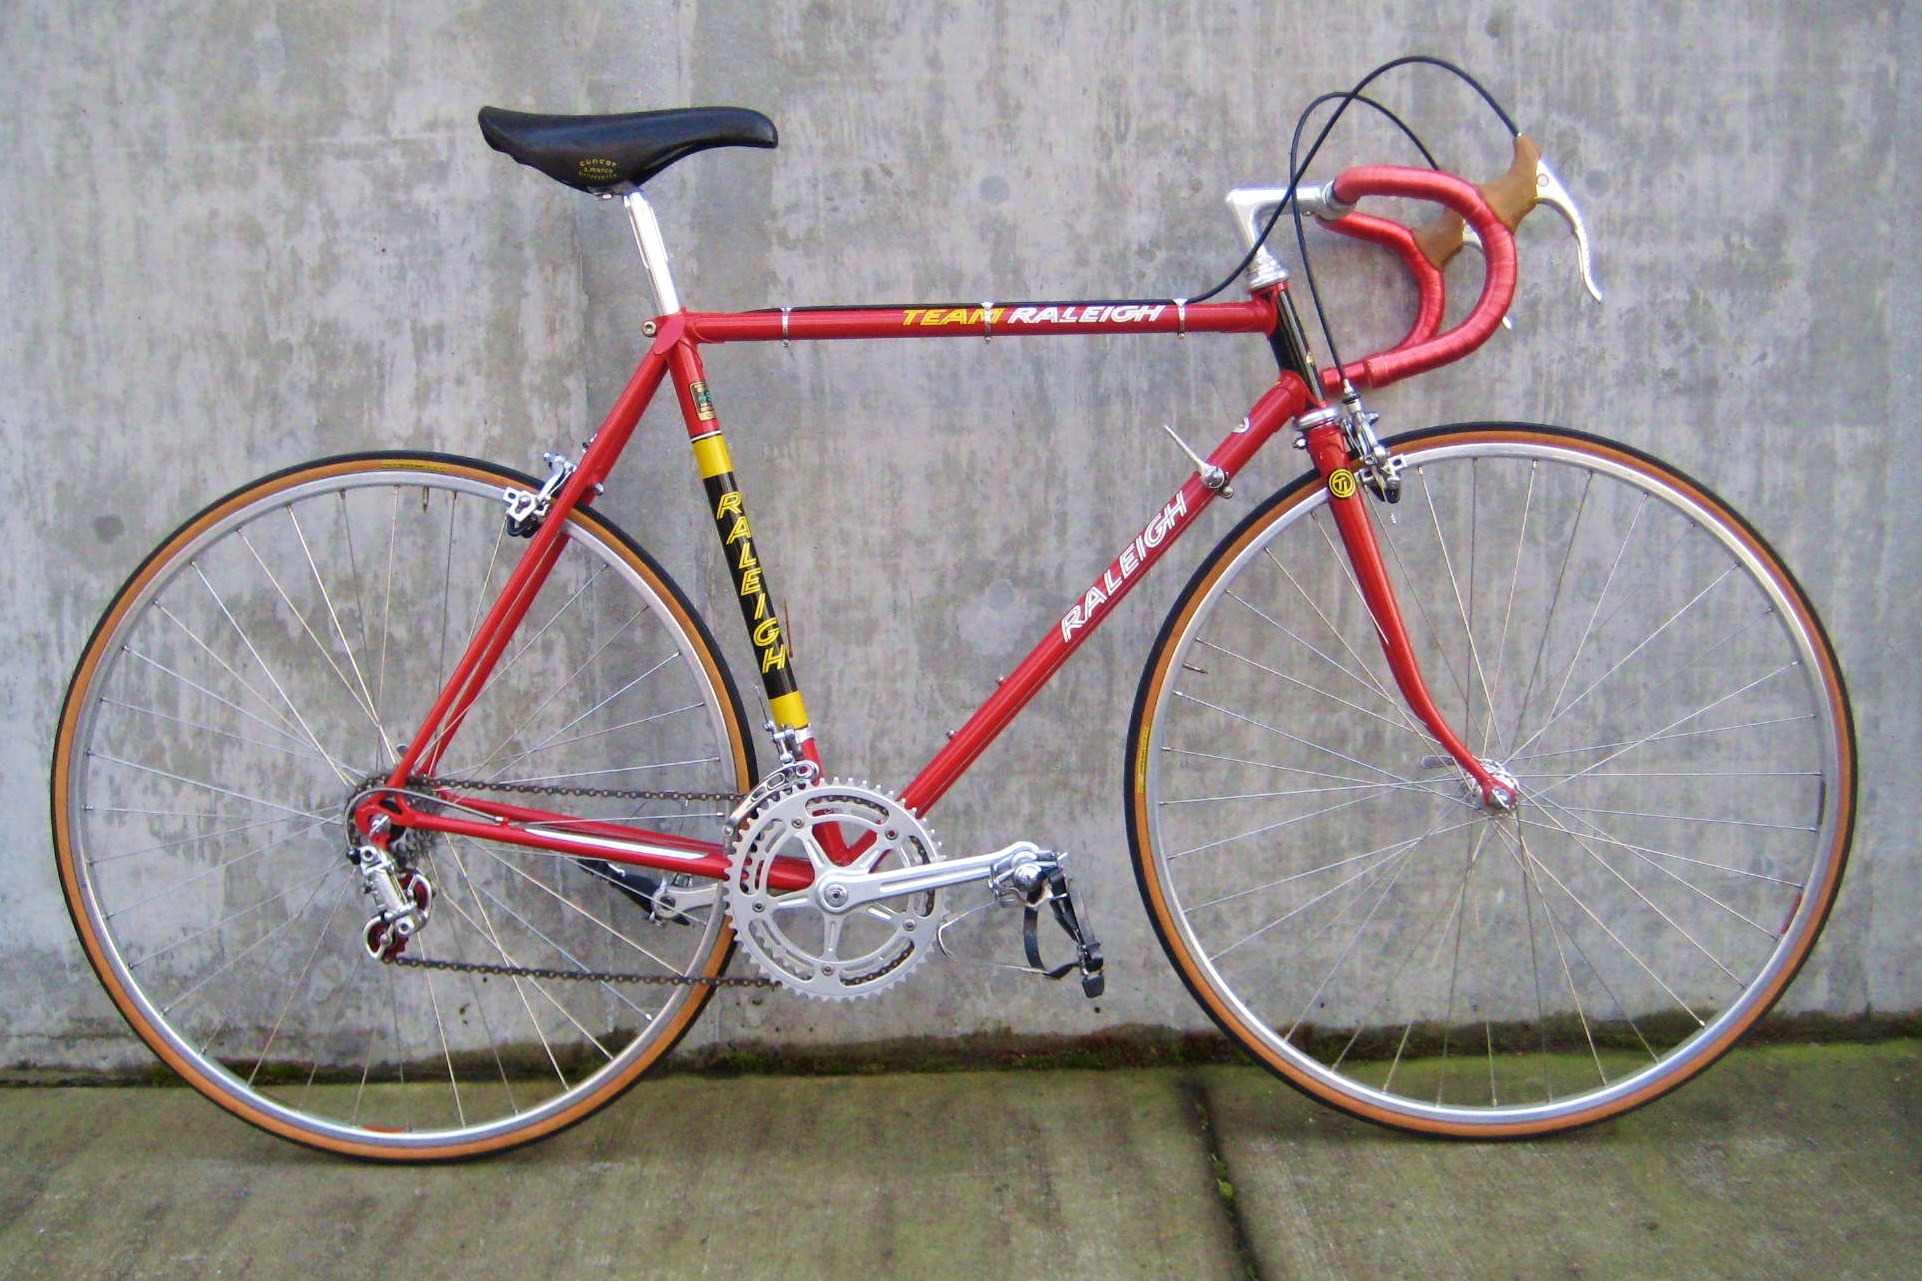 1979 T I Raleigh Team replica bike at Classic Cycle Classic Cycle